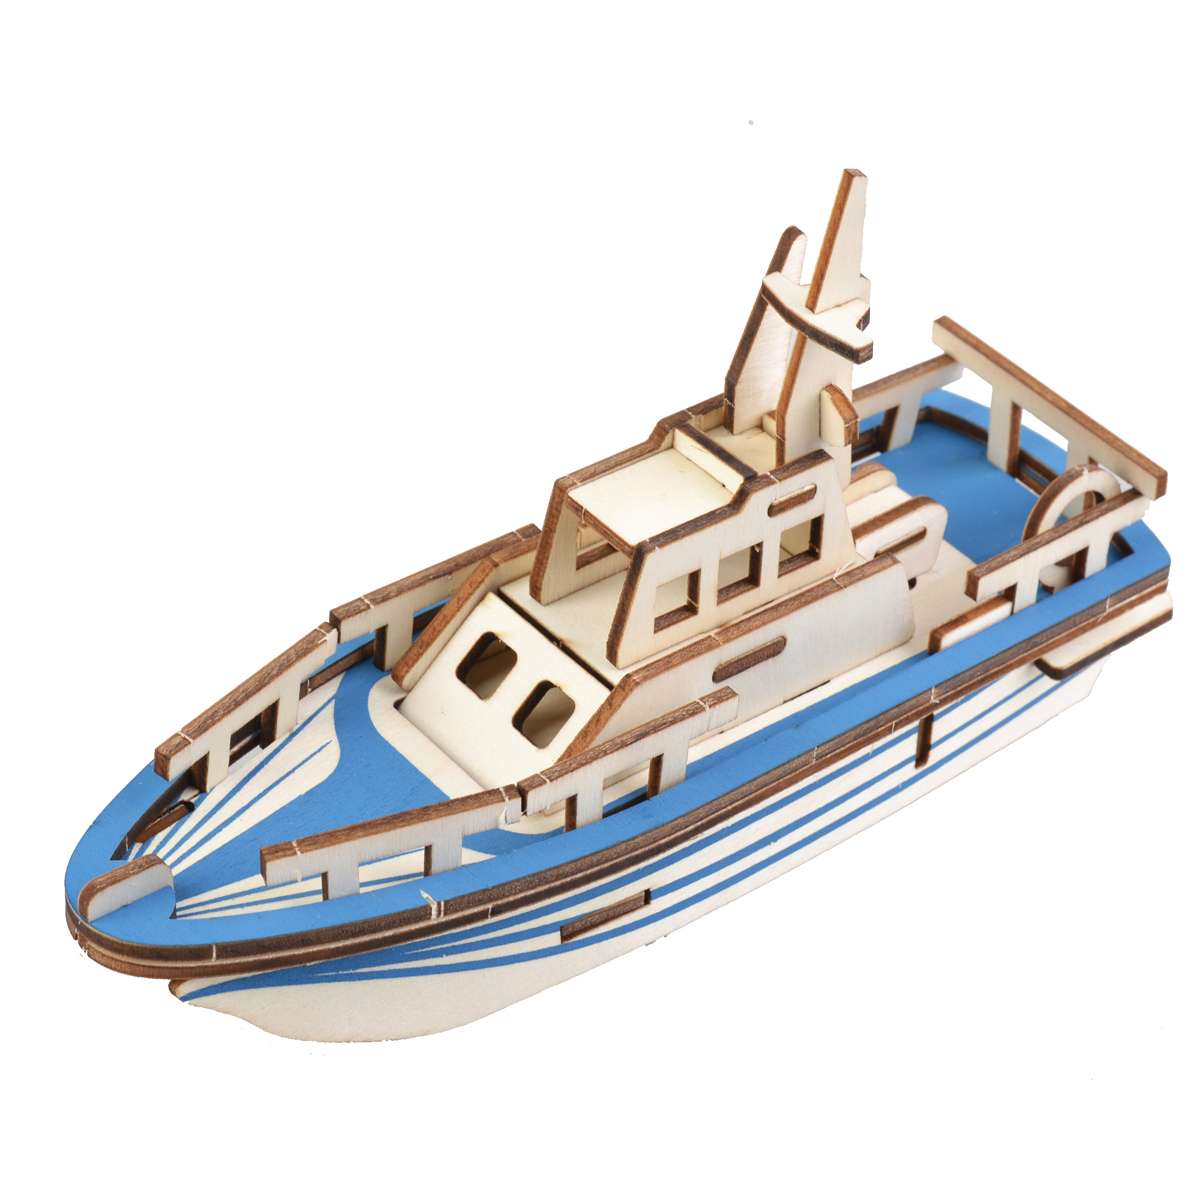 3D-Woodcraft-Assembly-Battleship-Series-Kit-Jigsaw-Puzzle-Toy-Decoration-Model-for-Kids-Gift-1632733-7